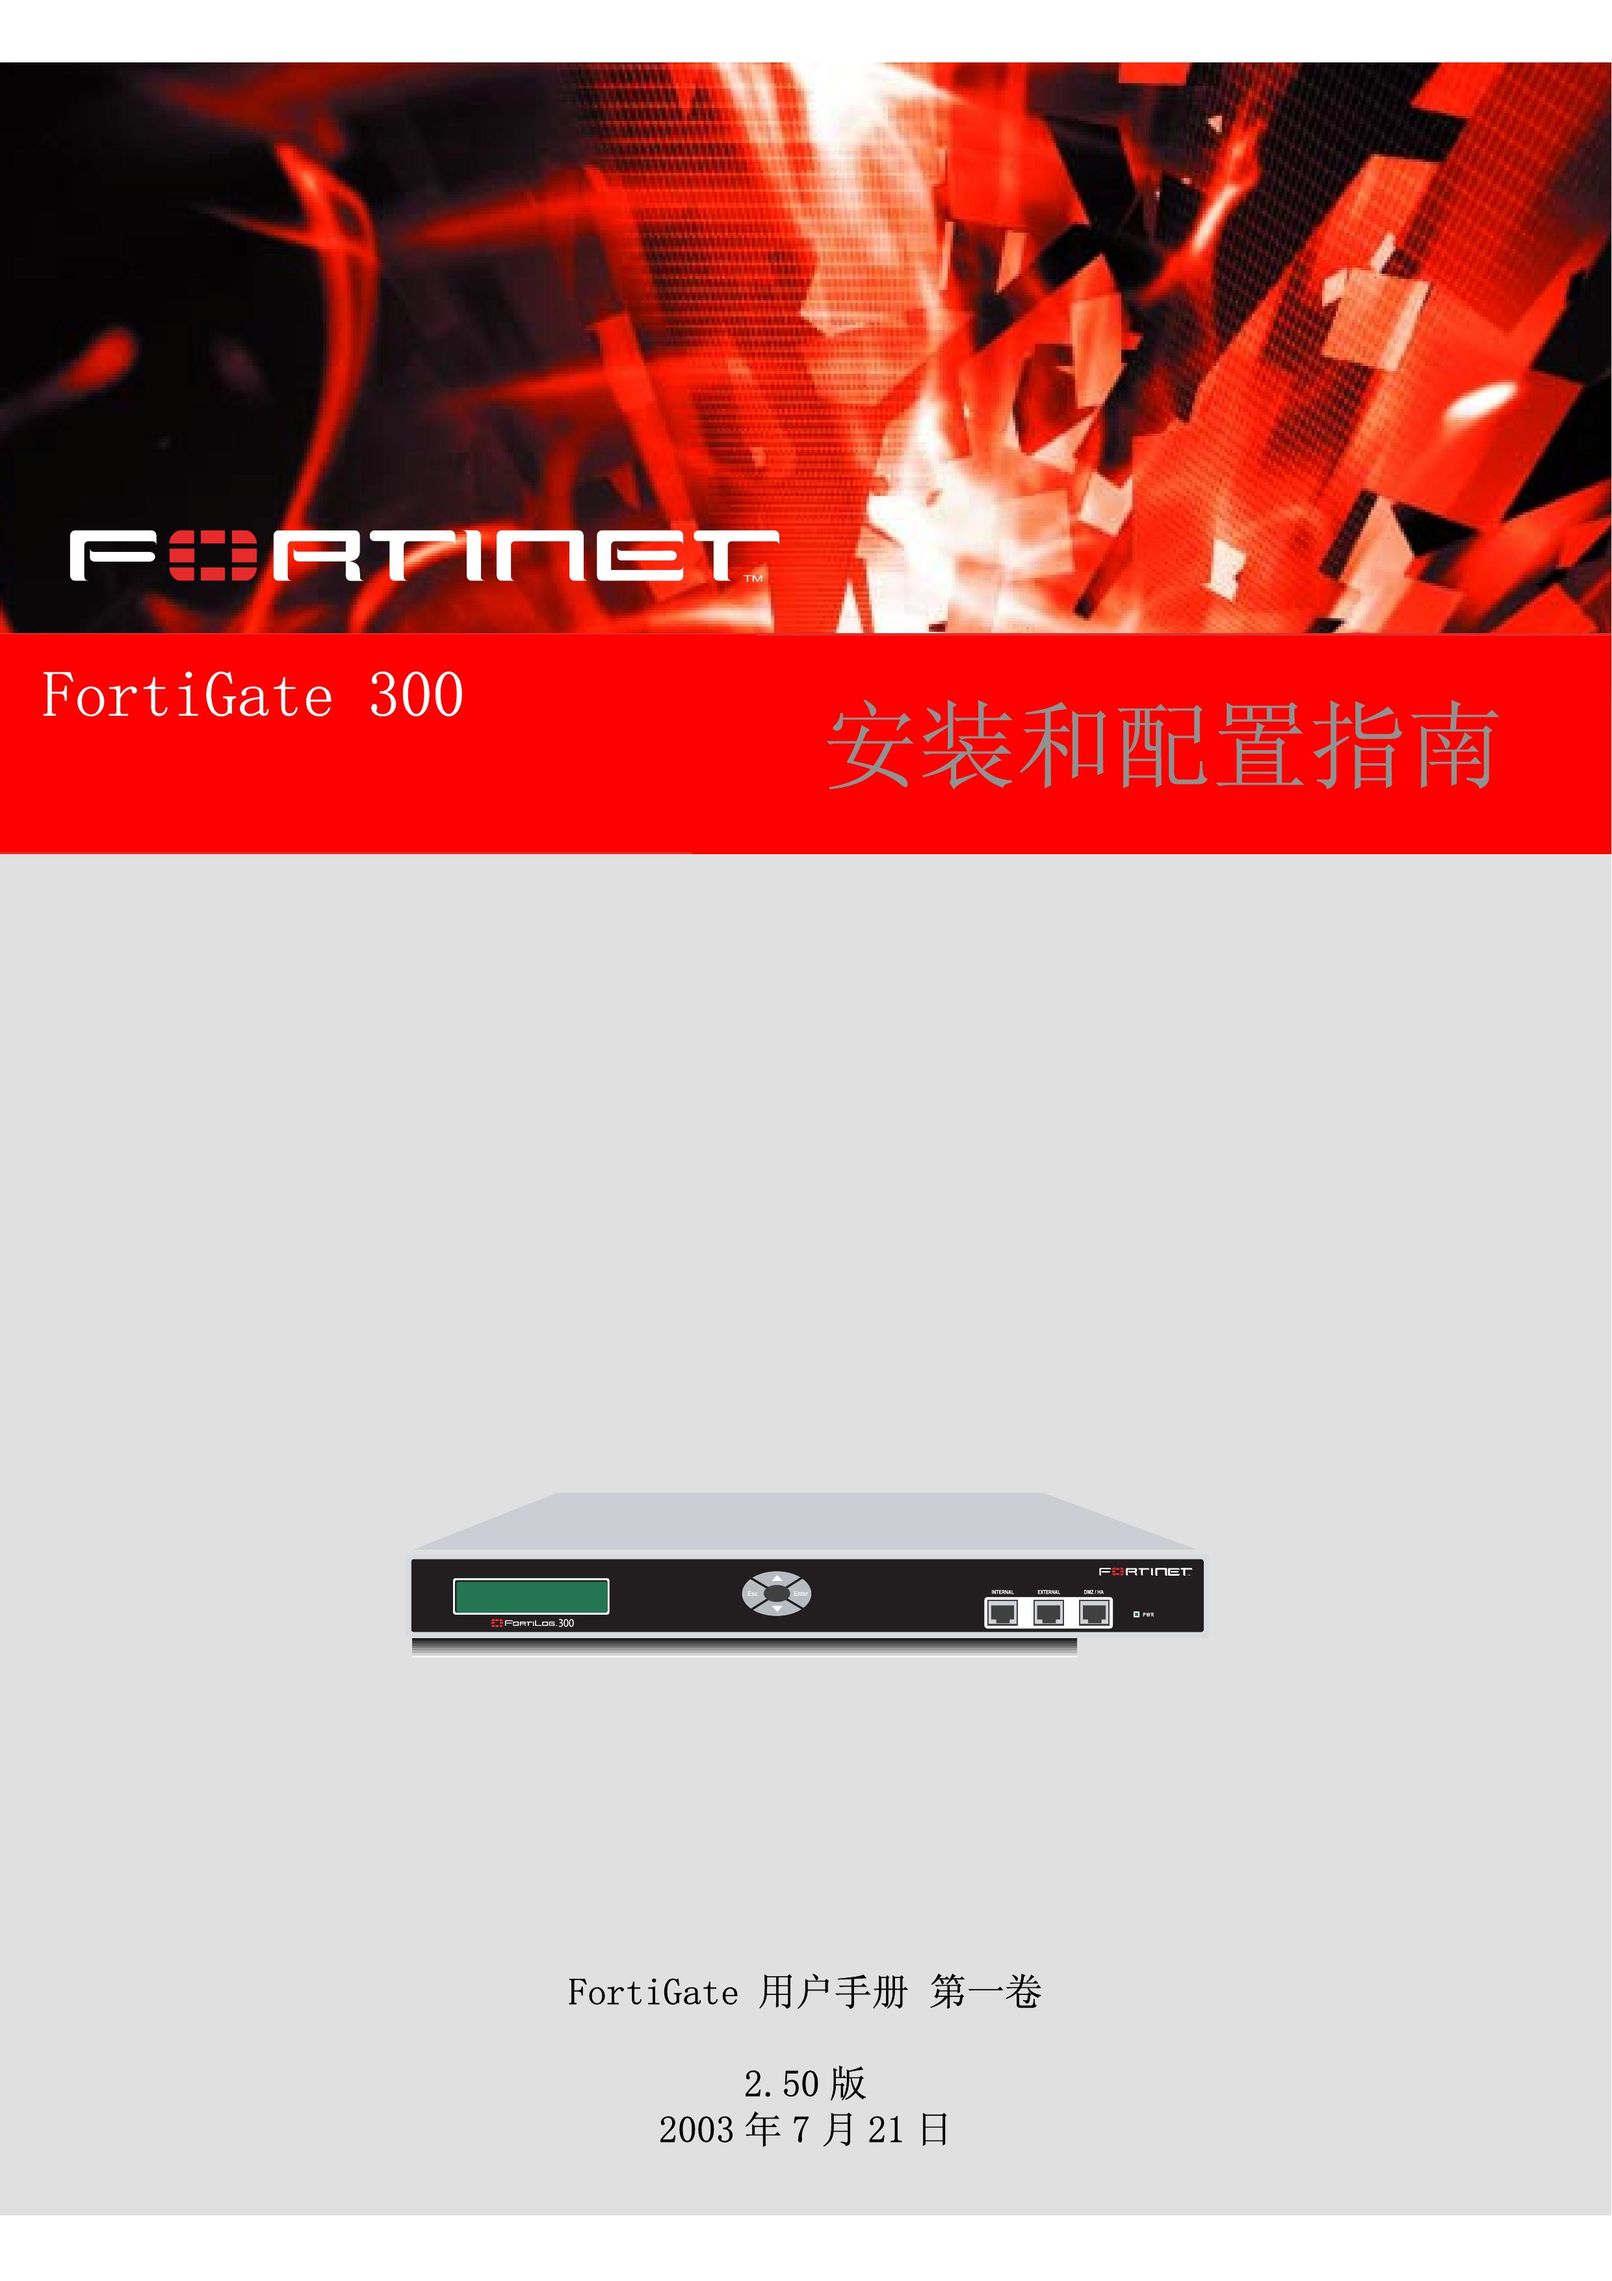 Fortinet 300 Network Card User Manual